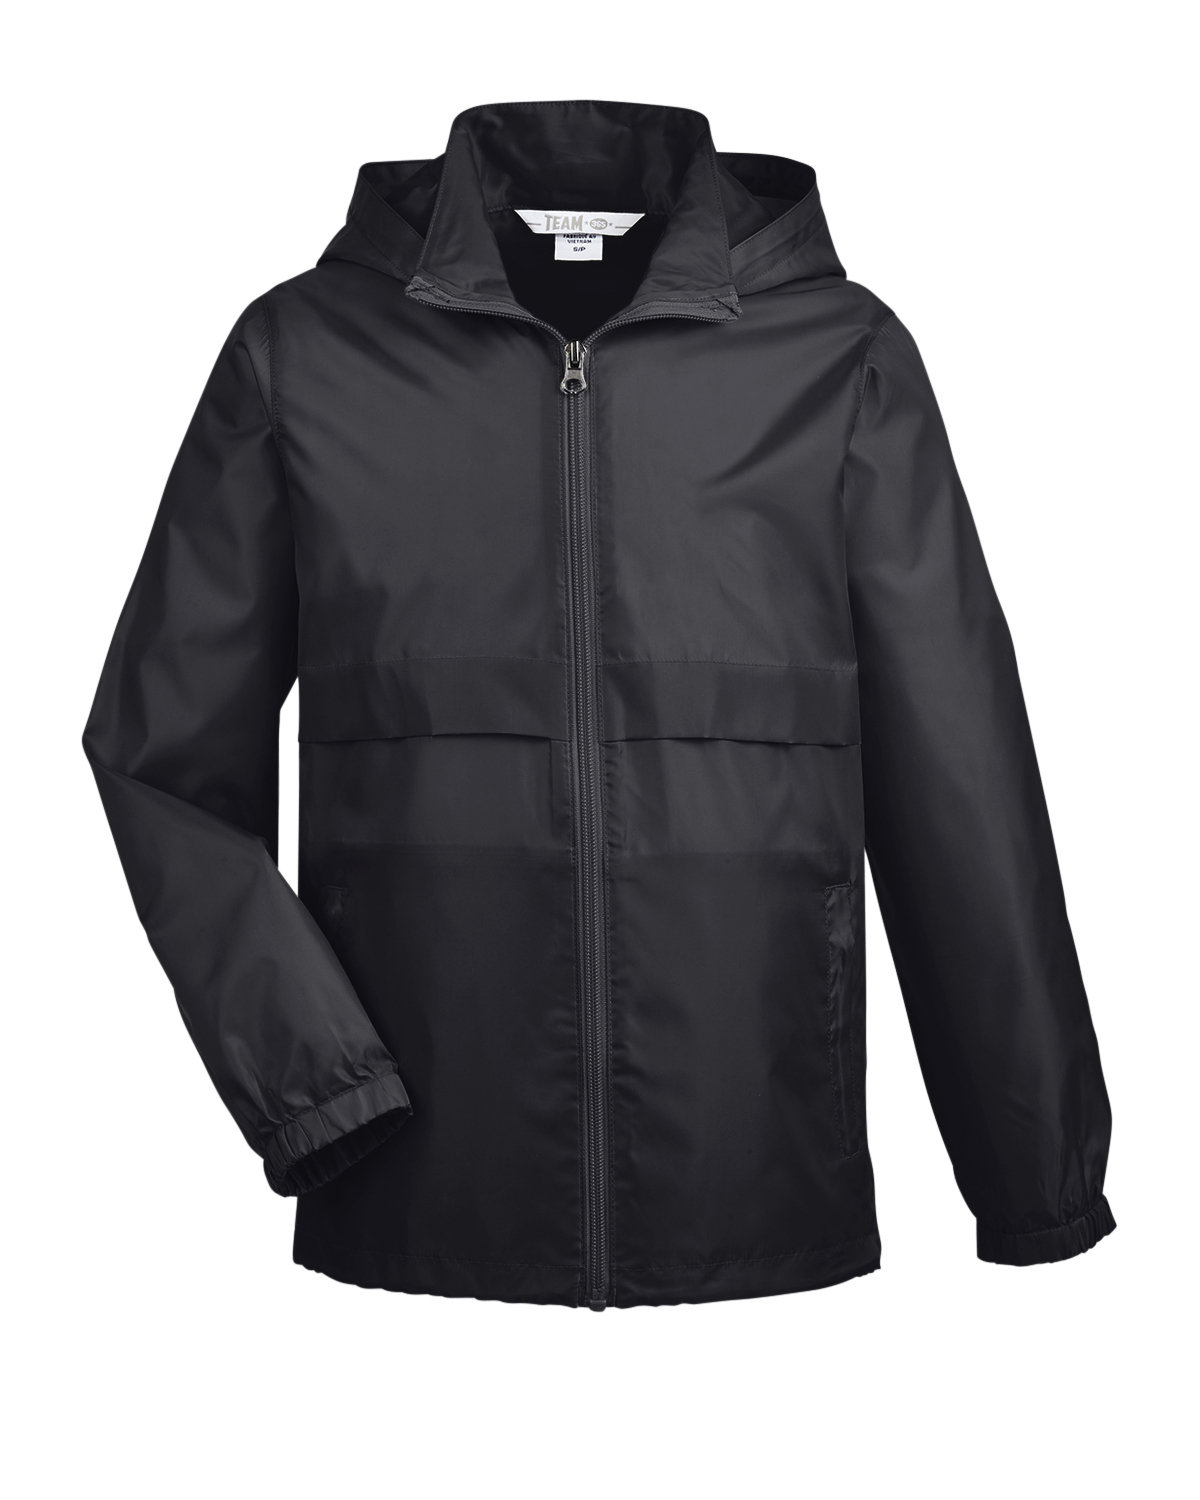 Team 365 Youth Zone Protect Lightweight Jacket | alphabroder Canada